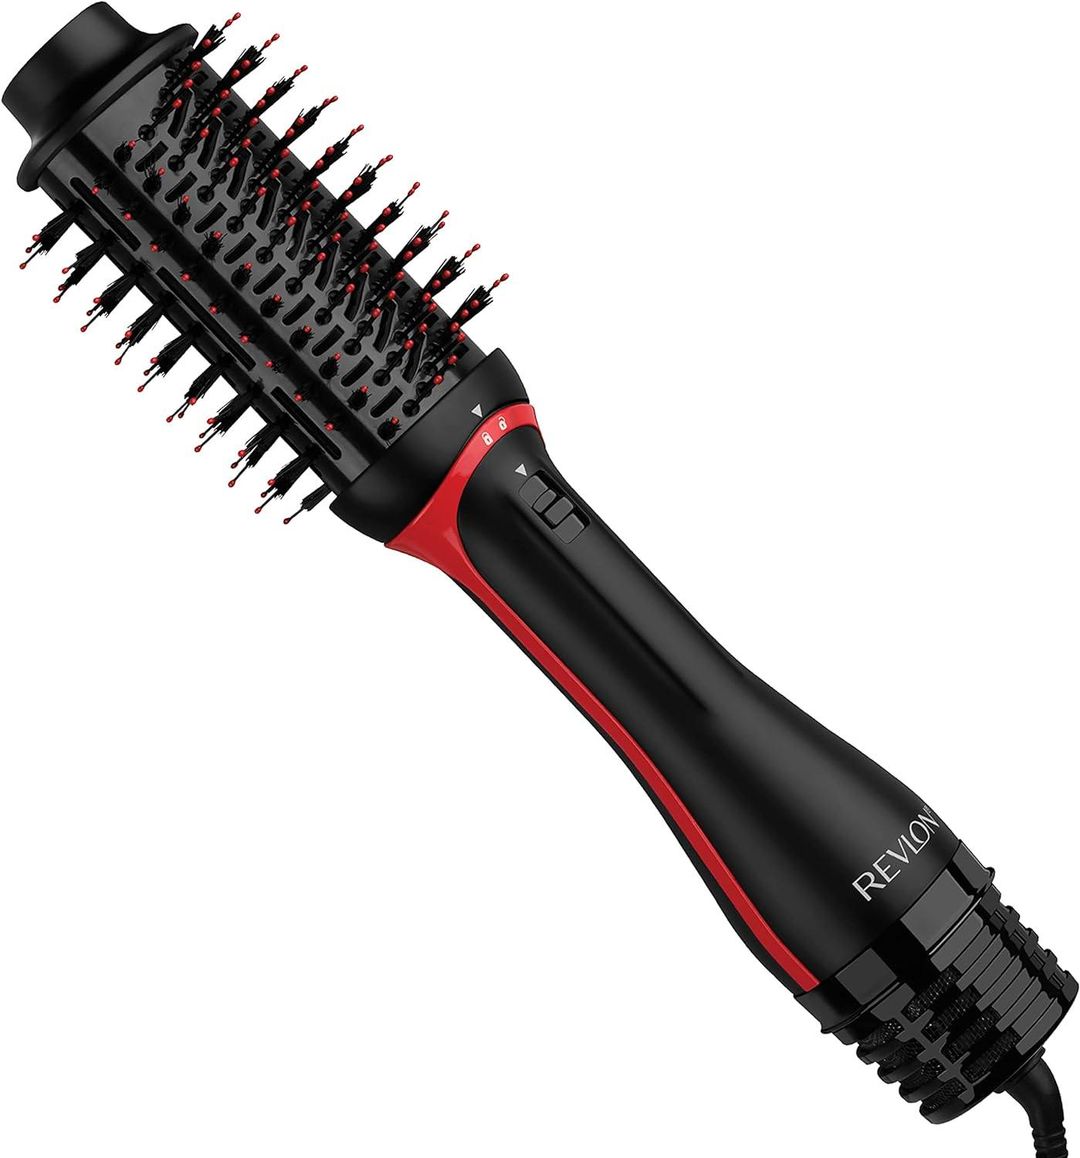 42% of of the REVLON One-Step Volumizer PLUS 2.0 Hair Dryer and Hot Air Brush!